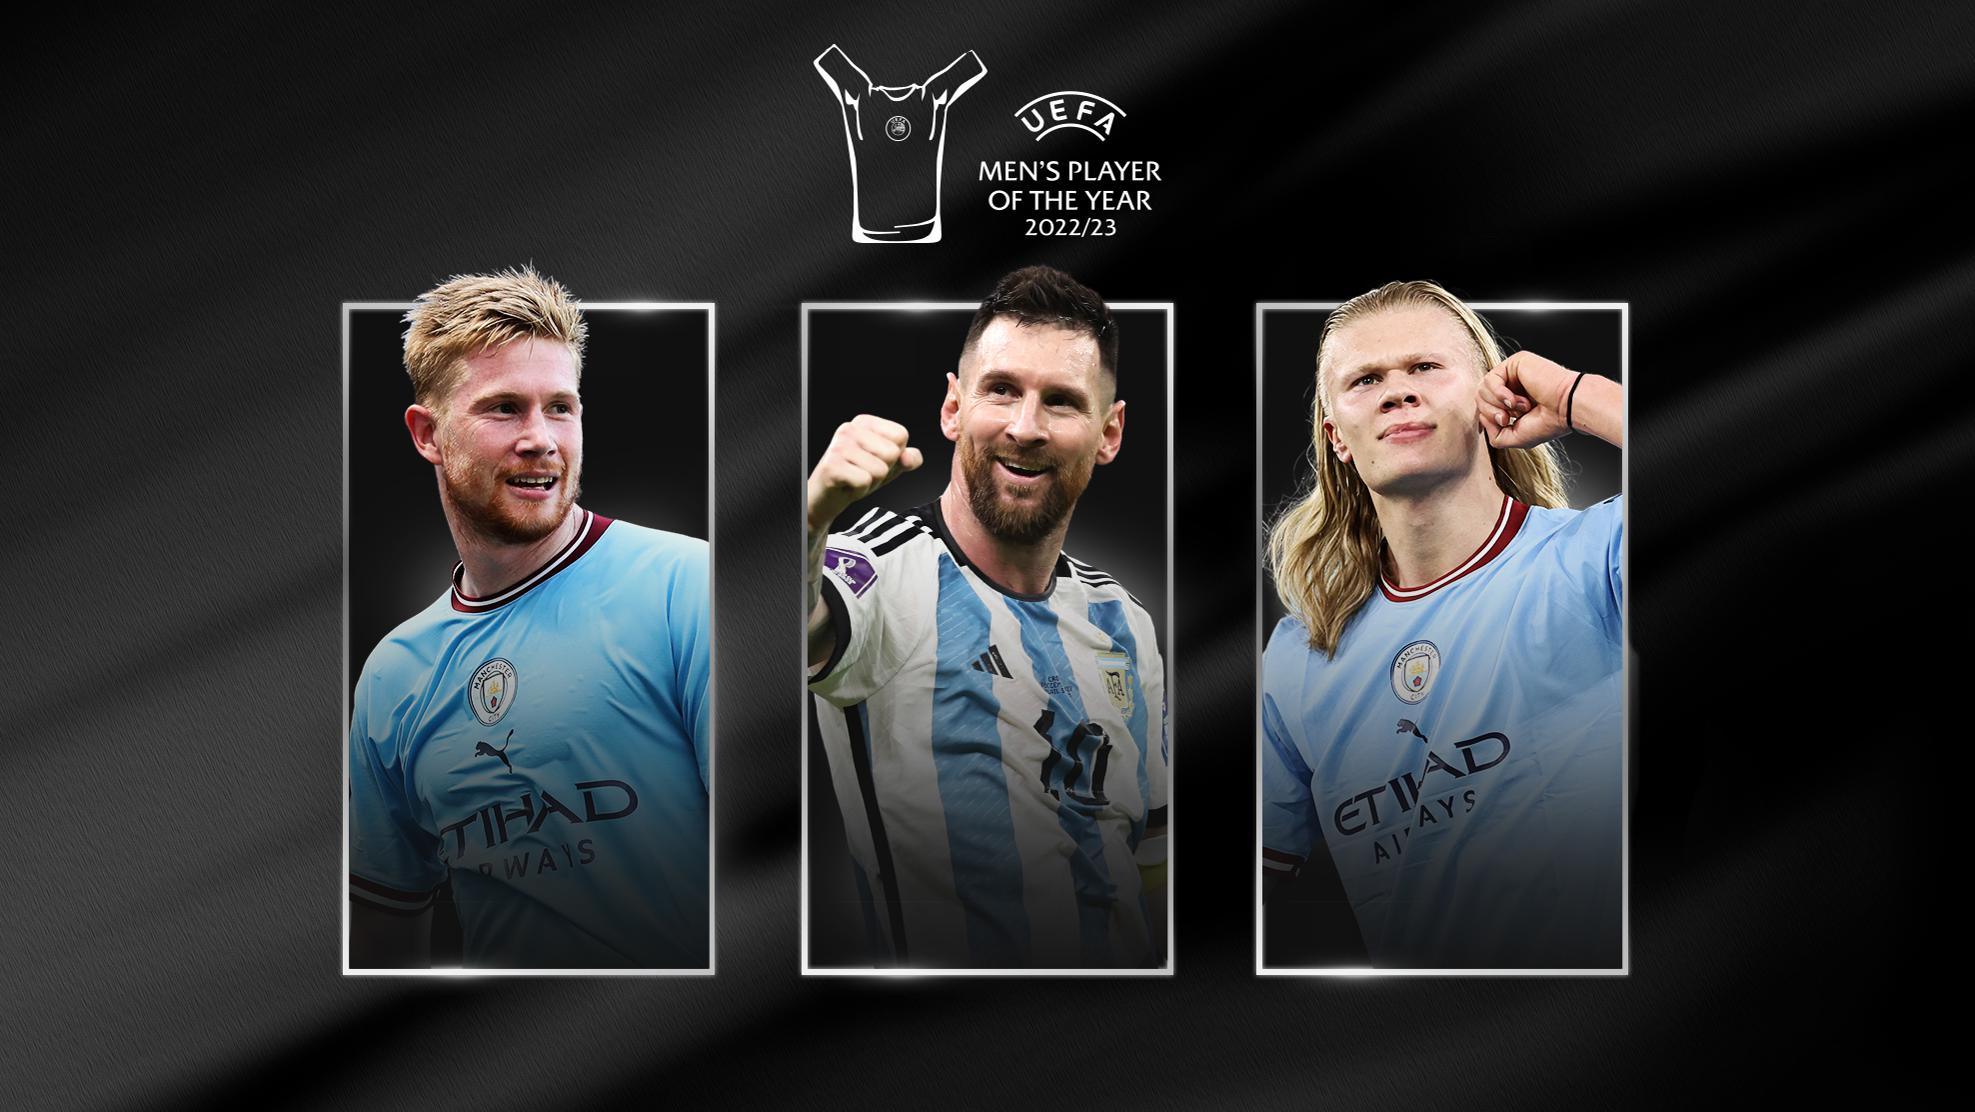 2022/23 UEFA Men's Player of the Year award nominees announced: Kevin De  Bruyne, Erling Haaland, Lionel Messi | UEFA Champions League | UEFA.com